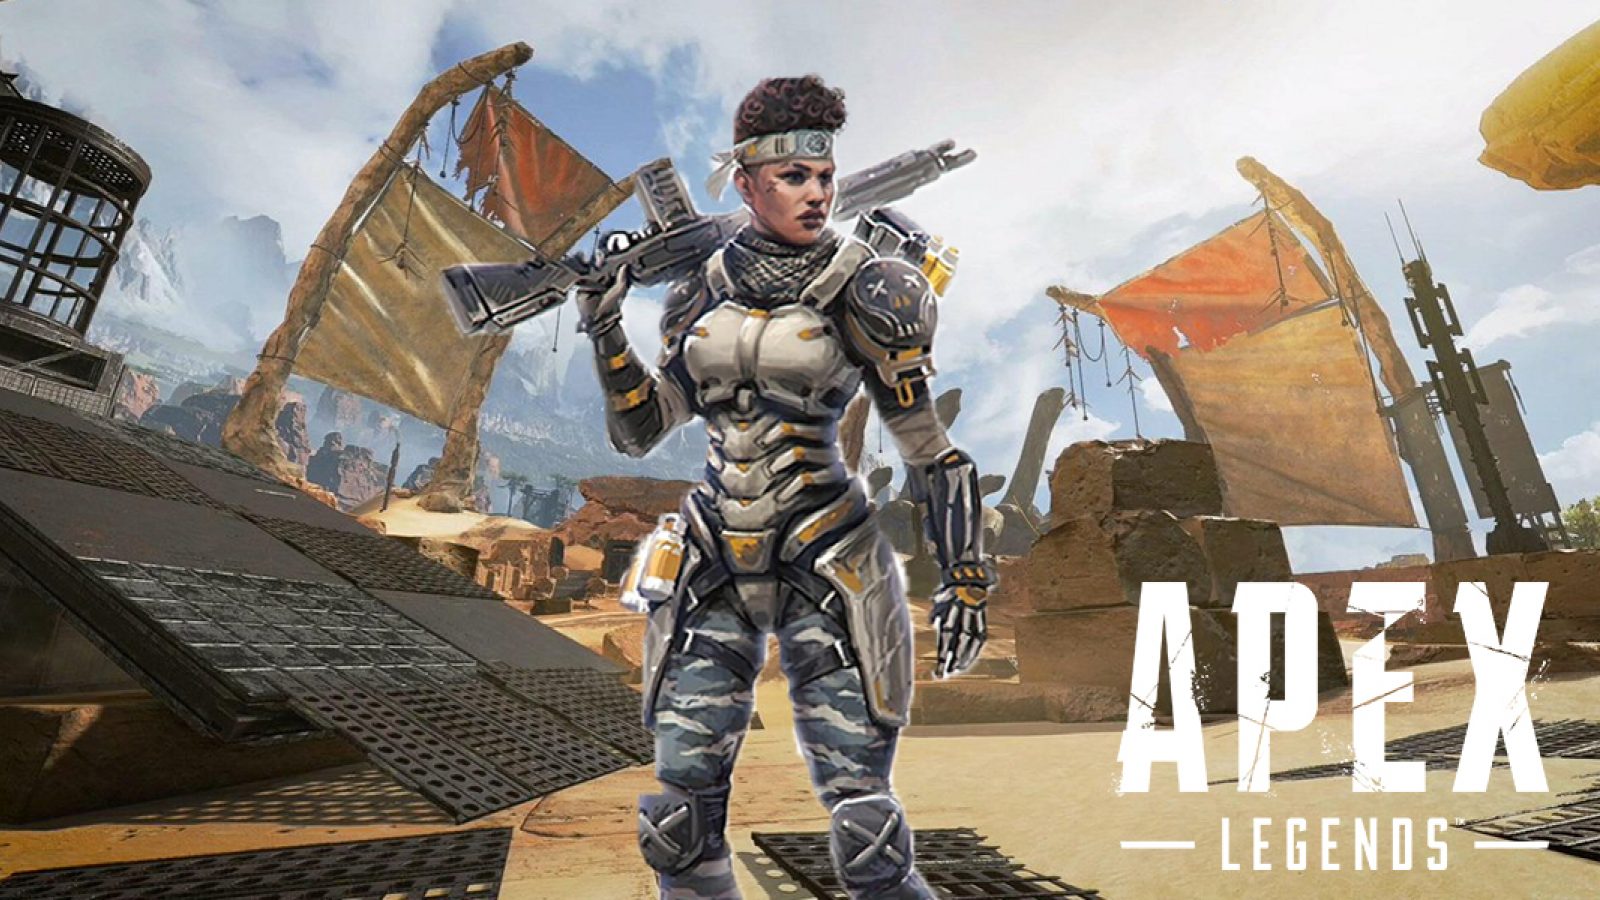 Best Apex Legends skin concepts – Bangalore, Octane, Mirage and more ...